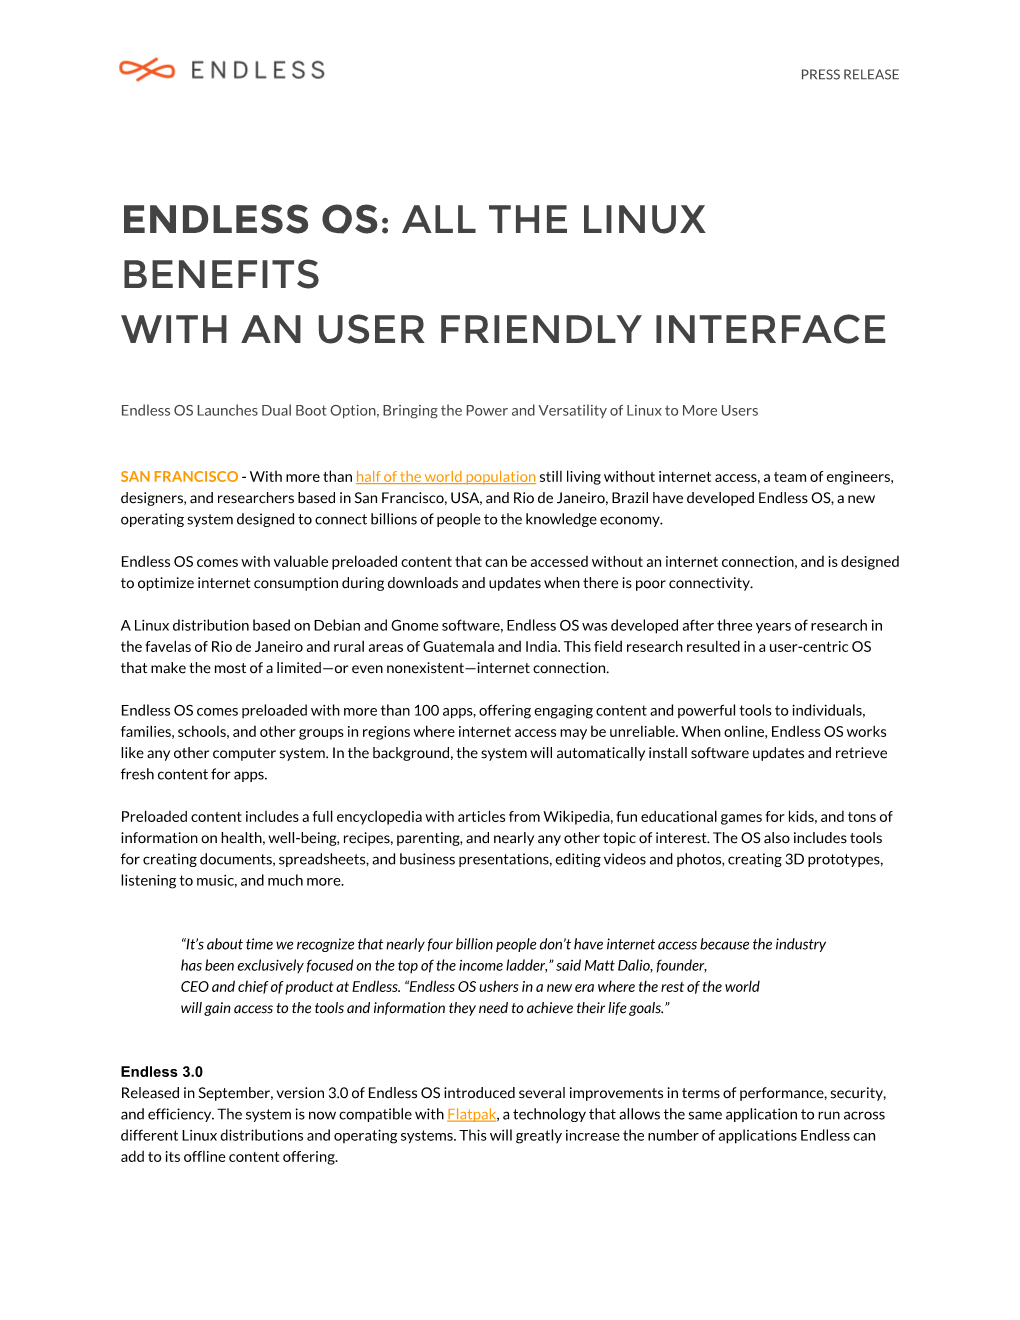 Endless Os​: All the Linux Benefits with an User Friendly Interface